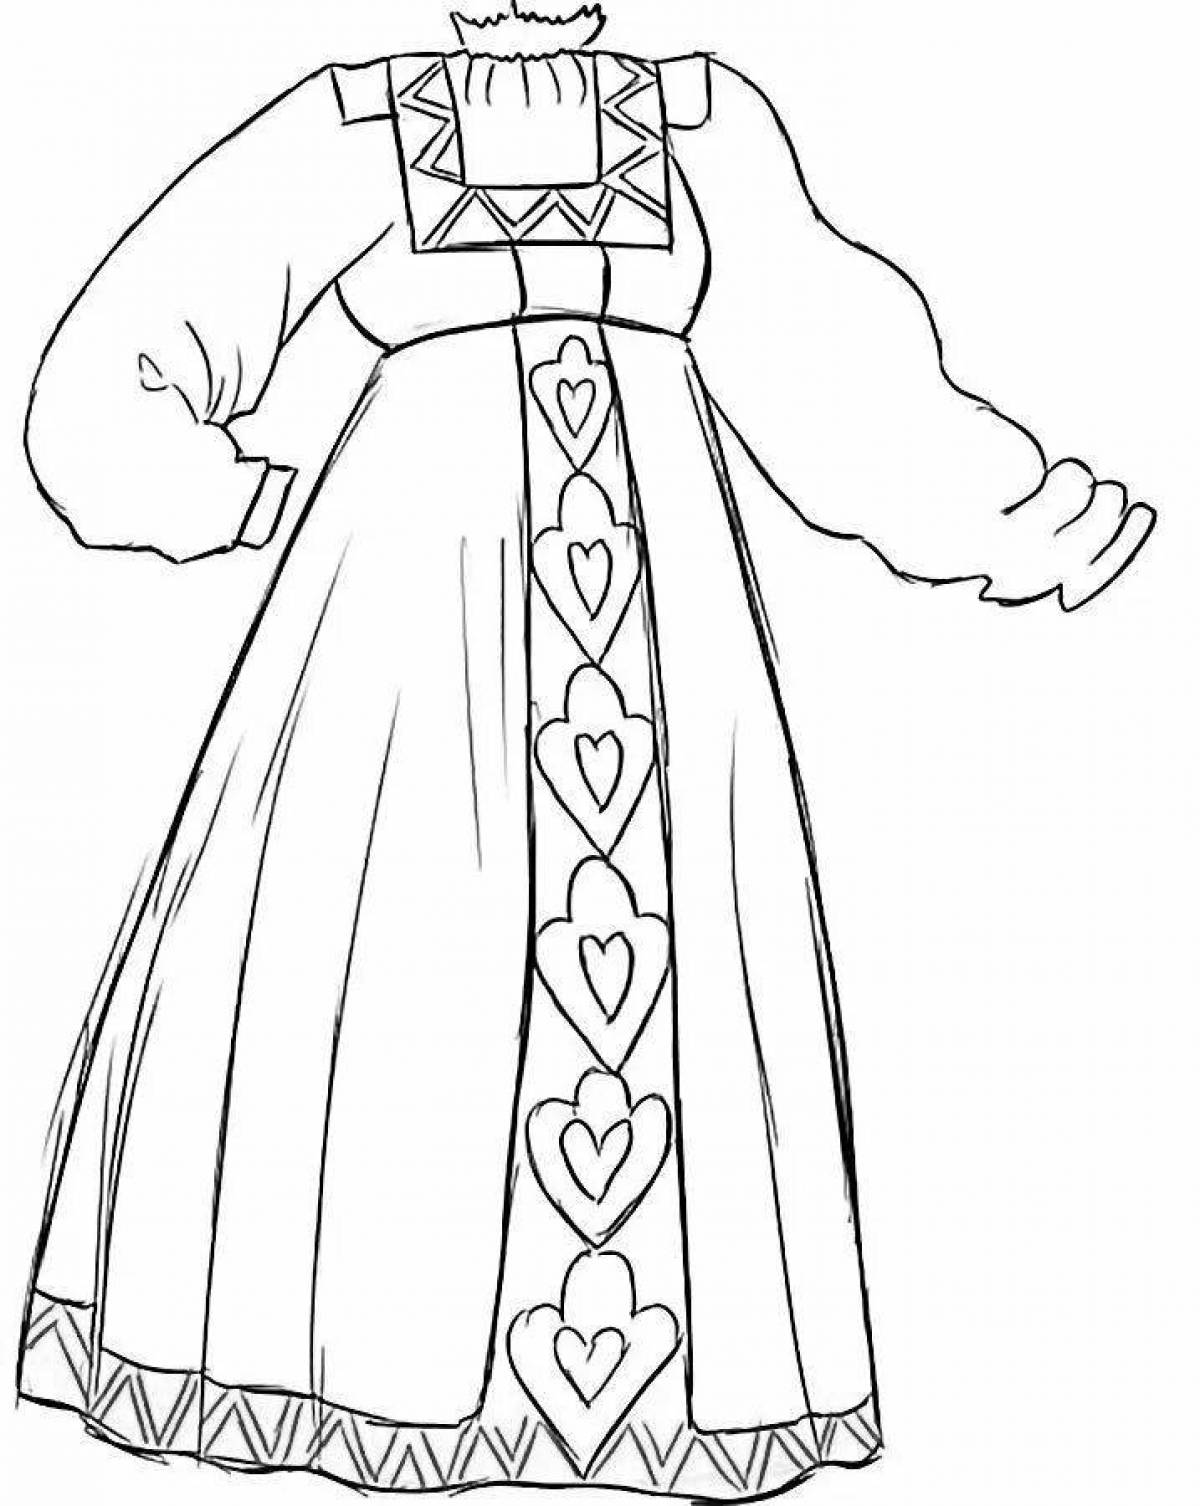 Coloring page radiant Russian folk costume